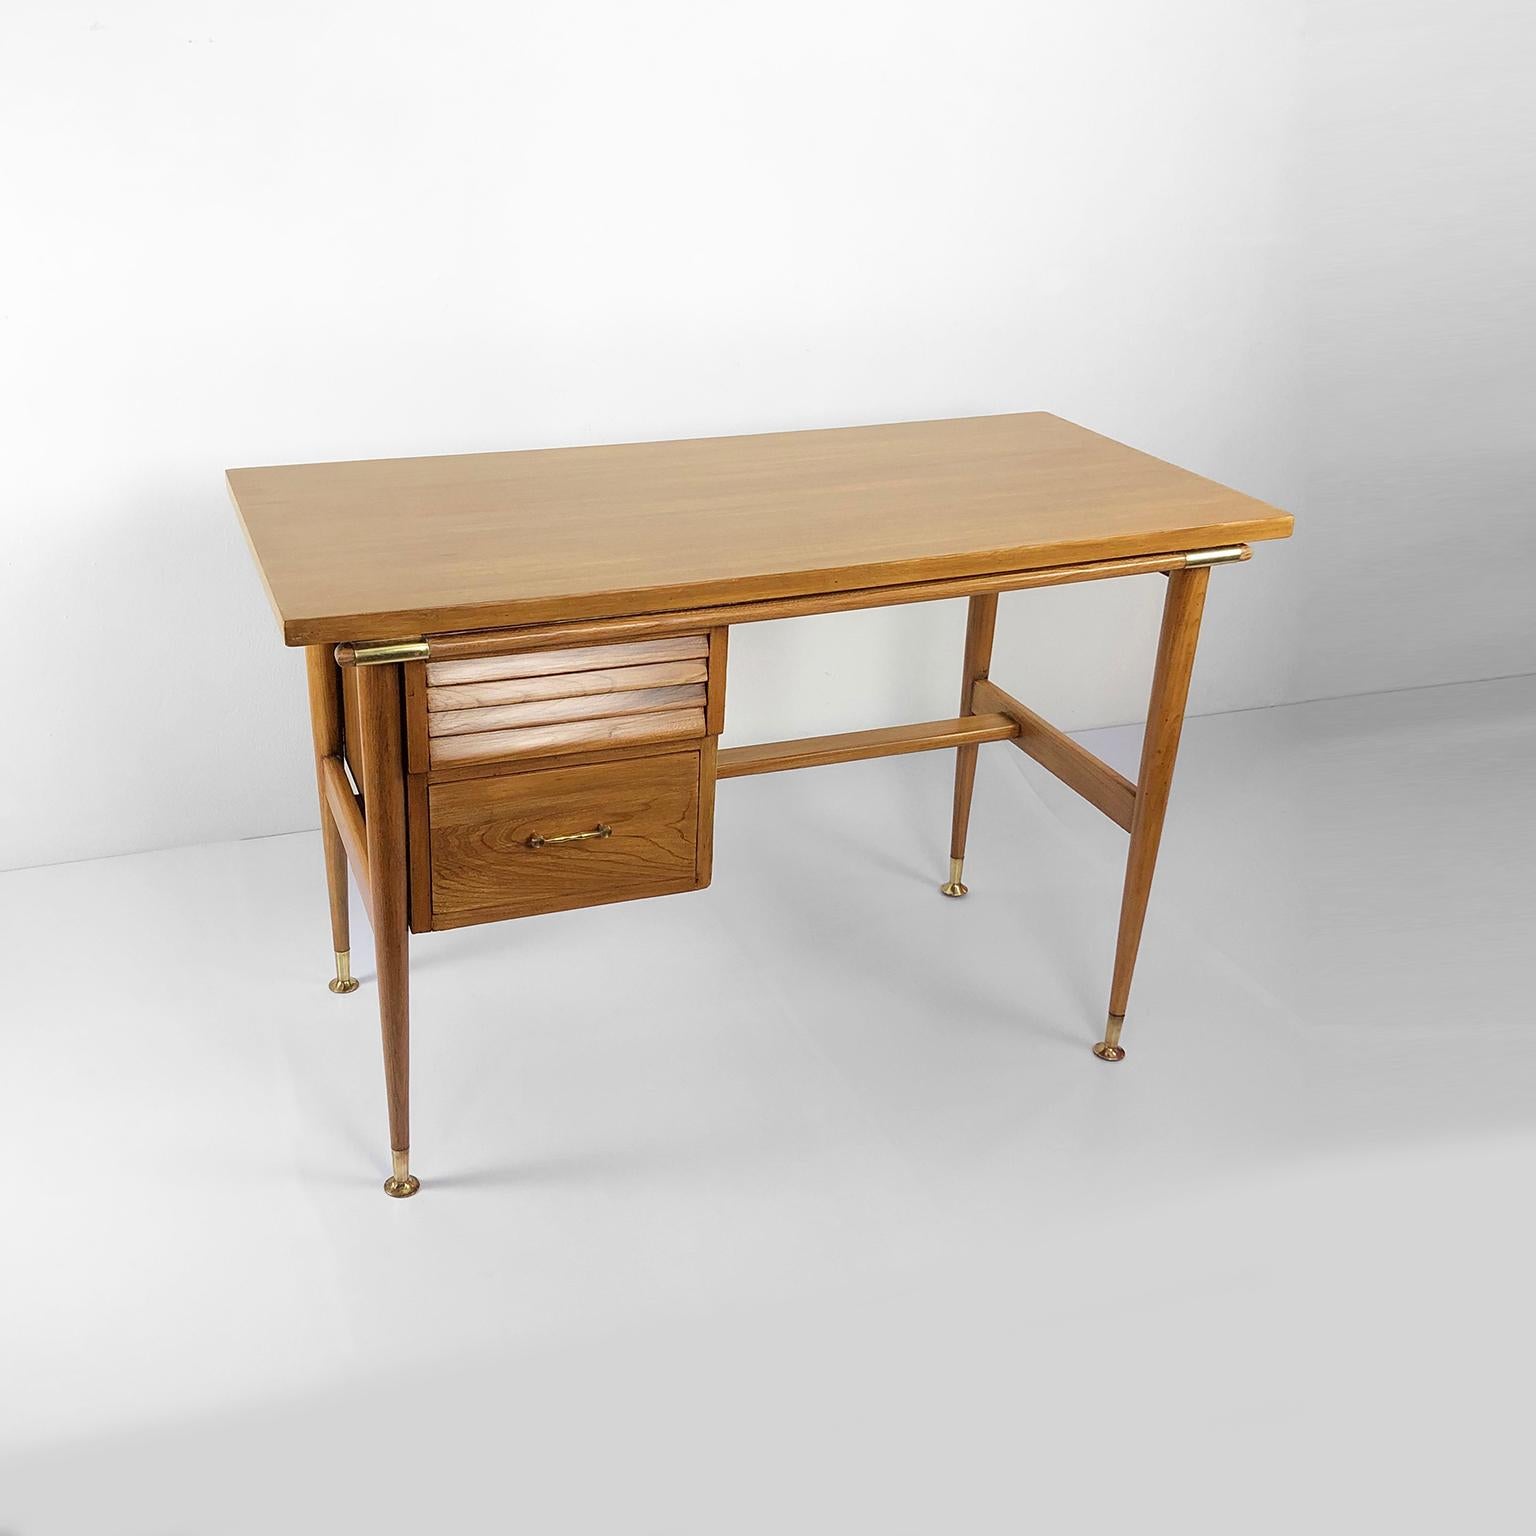 We offer this midcentury Mexican modern rare desk by 